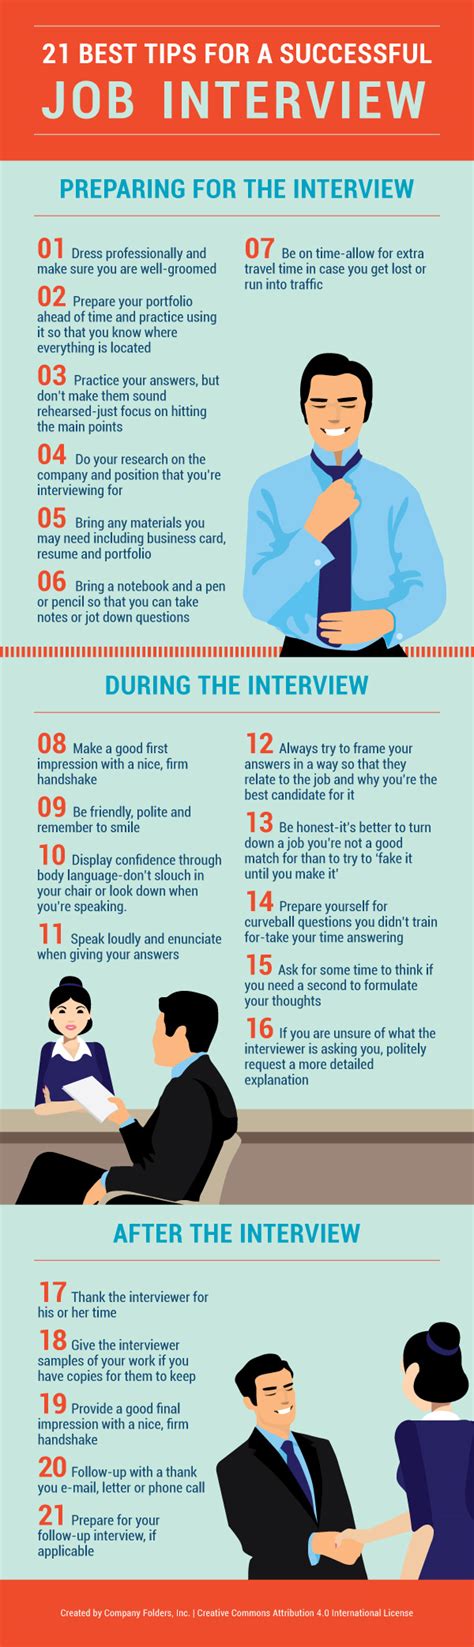 21 Best Tips For A Successful Job Interview Infographic Blog